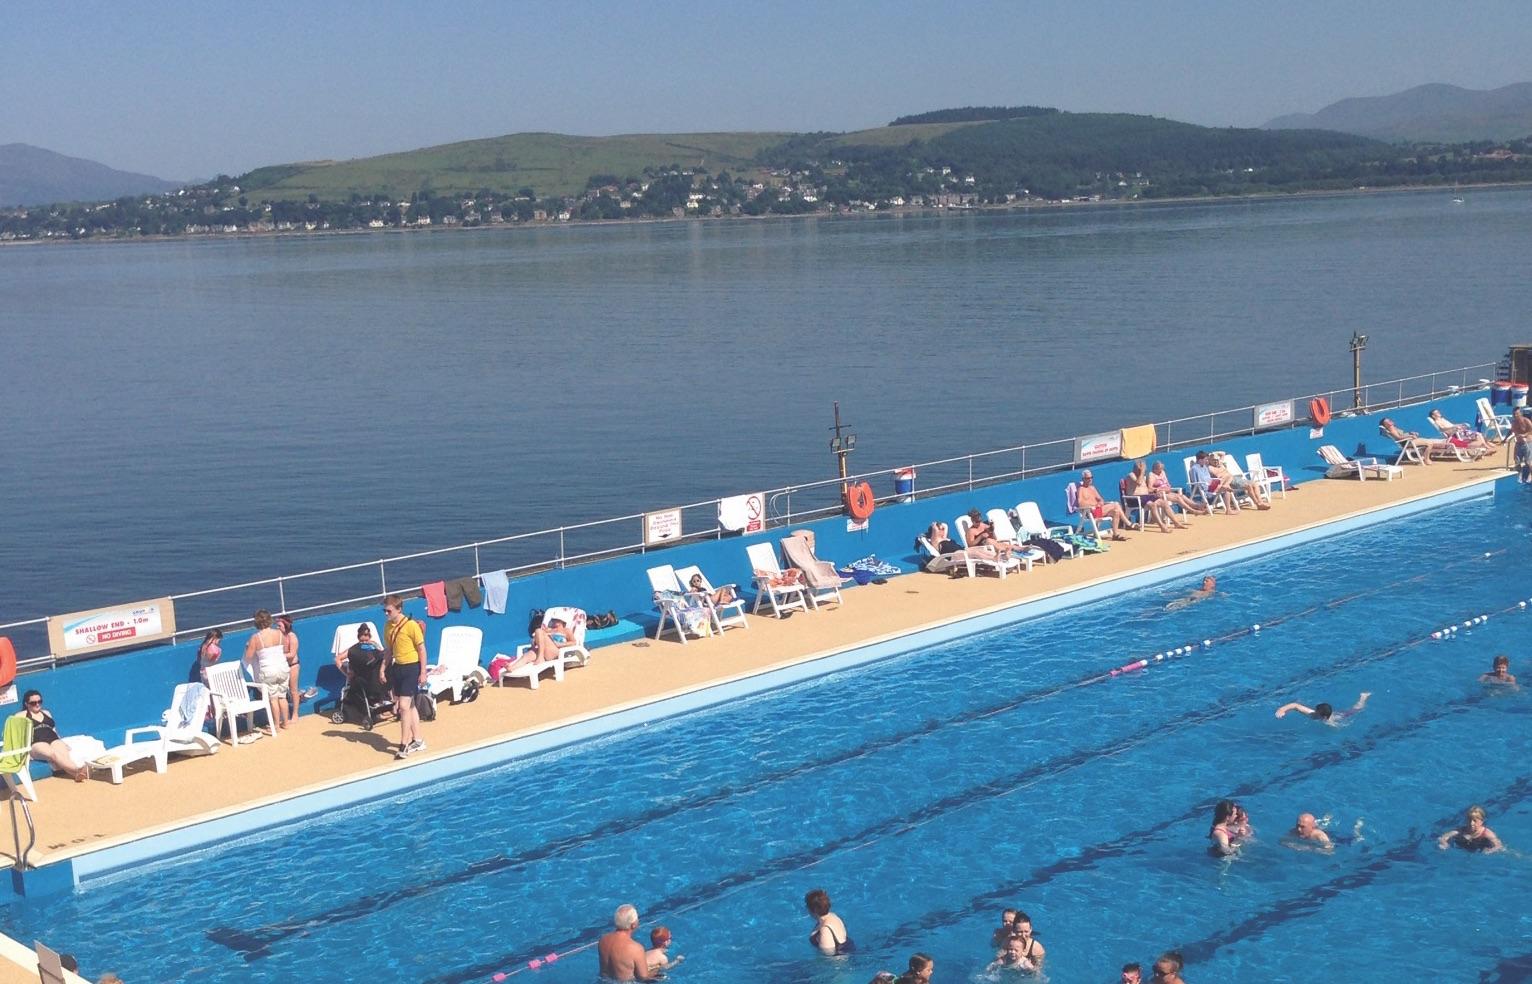 Outdoor swimming pools in Scotland are a thing (don't worry, this is heated)